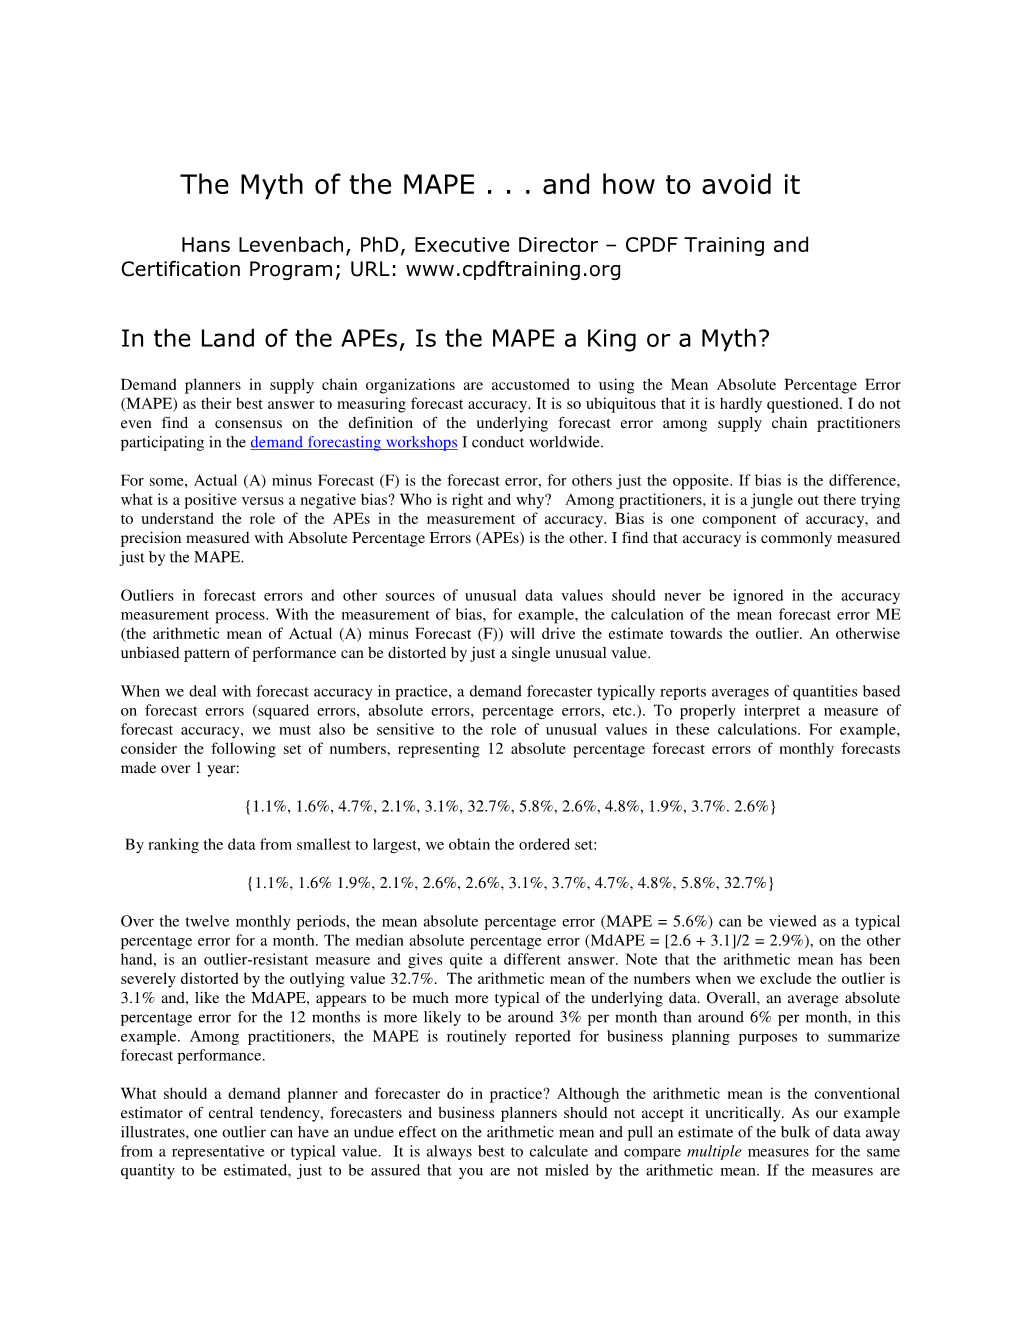 The Myth of the MAPE . . . and How to Avoid It